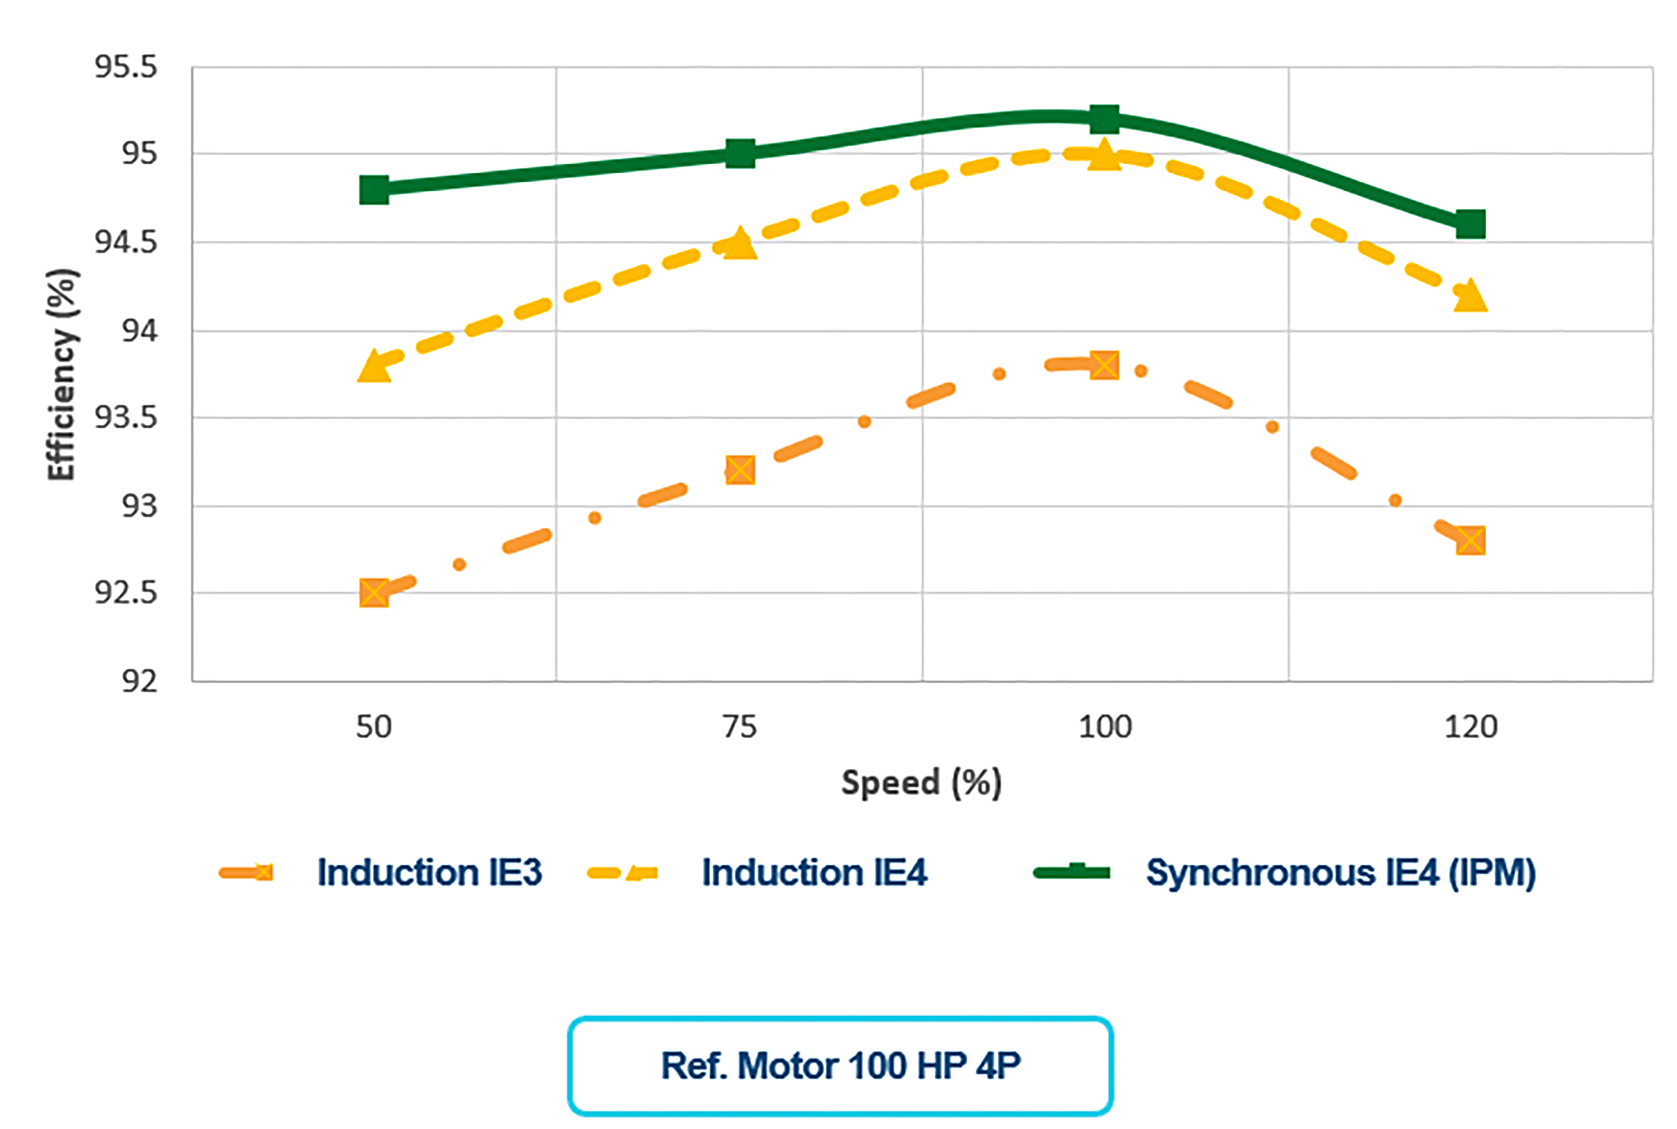 IMAGE 2: Comparison of synchronous IE4 motor to Induction IE3 and IE4 motors as a function of speed for a 100 horsepower (hp) reference.